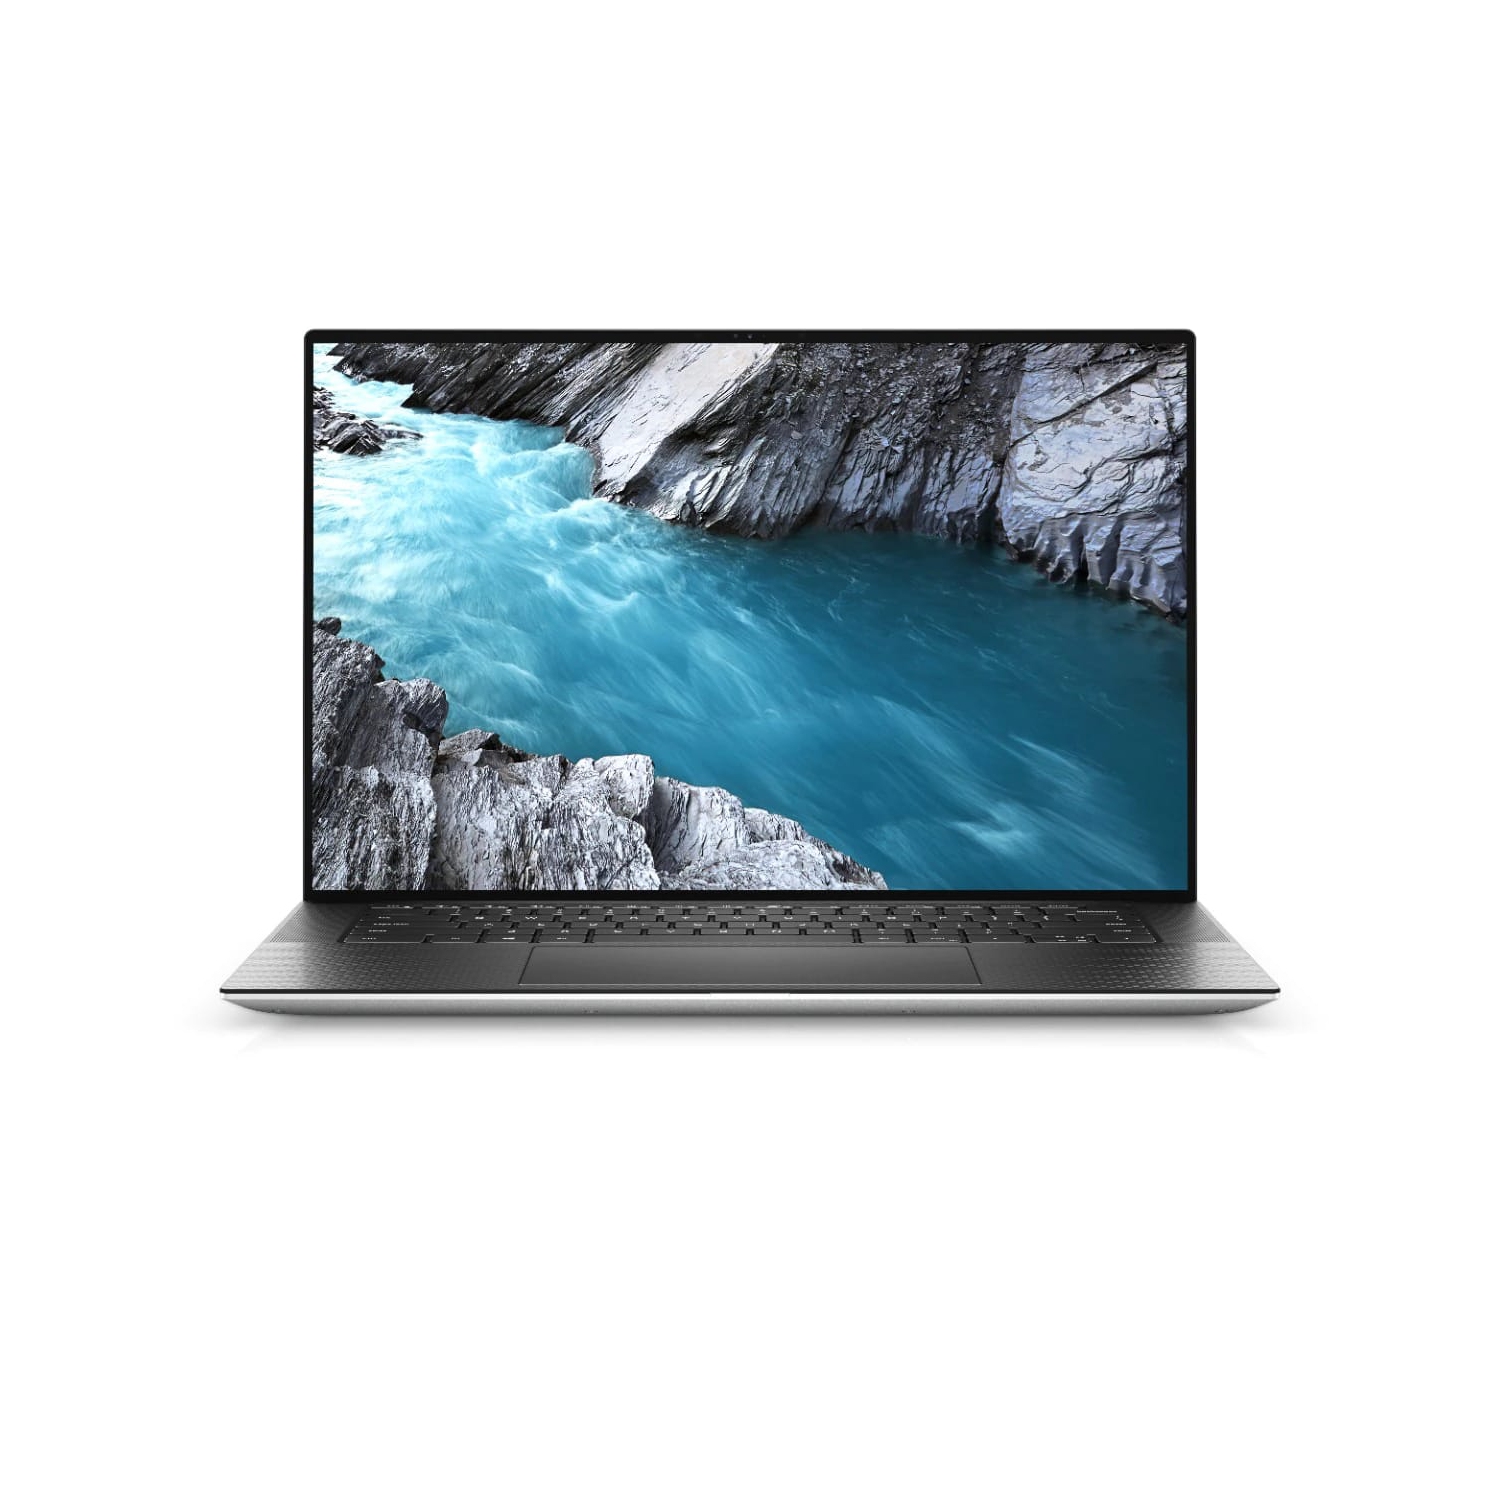 Refurbished (Excellent) - Dell XPS 15 9500 Laptop (2020) | 15" FHD+ | Core i7 - 256GB SSD - 16GB RAM - 1650 Ti | 6 Cores @ 5 GHz - 10th Gen CPU Certified Refurbished